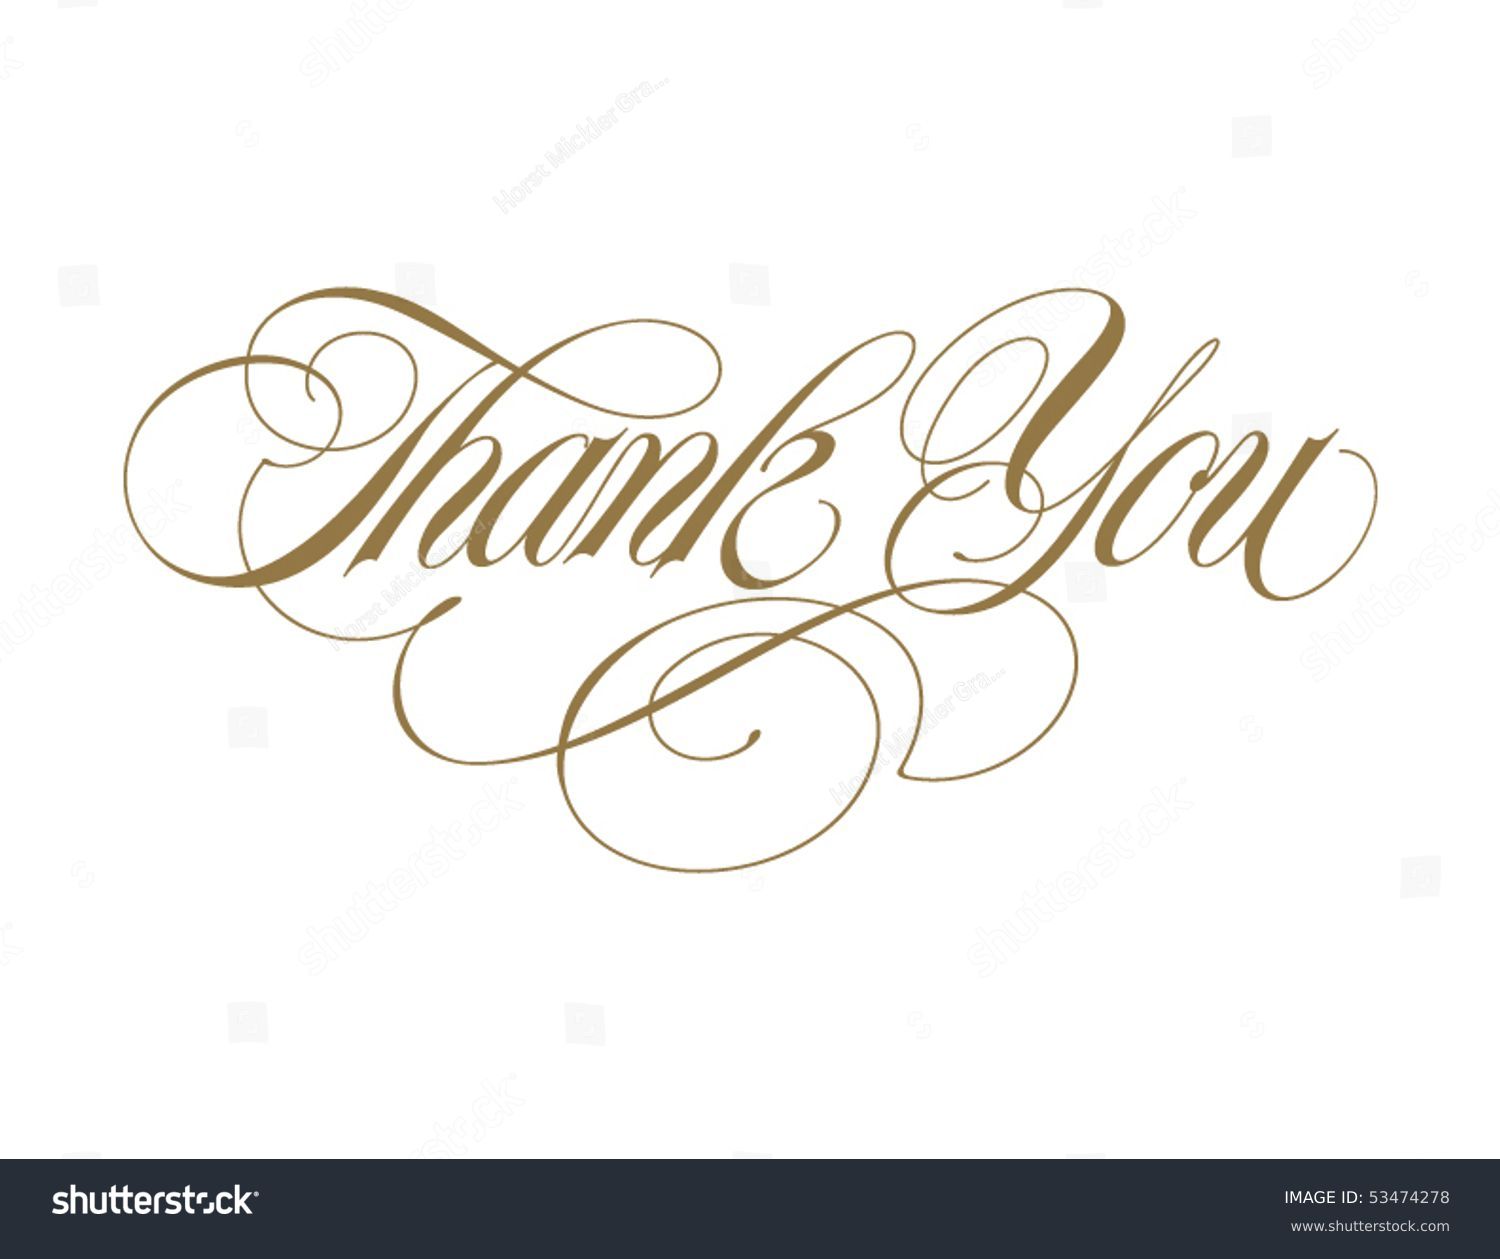 vector free download thank you - photo #25